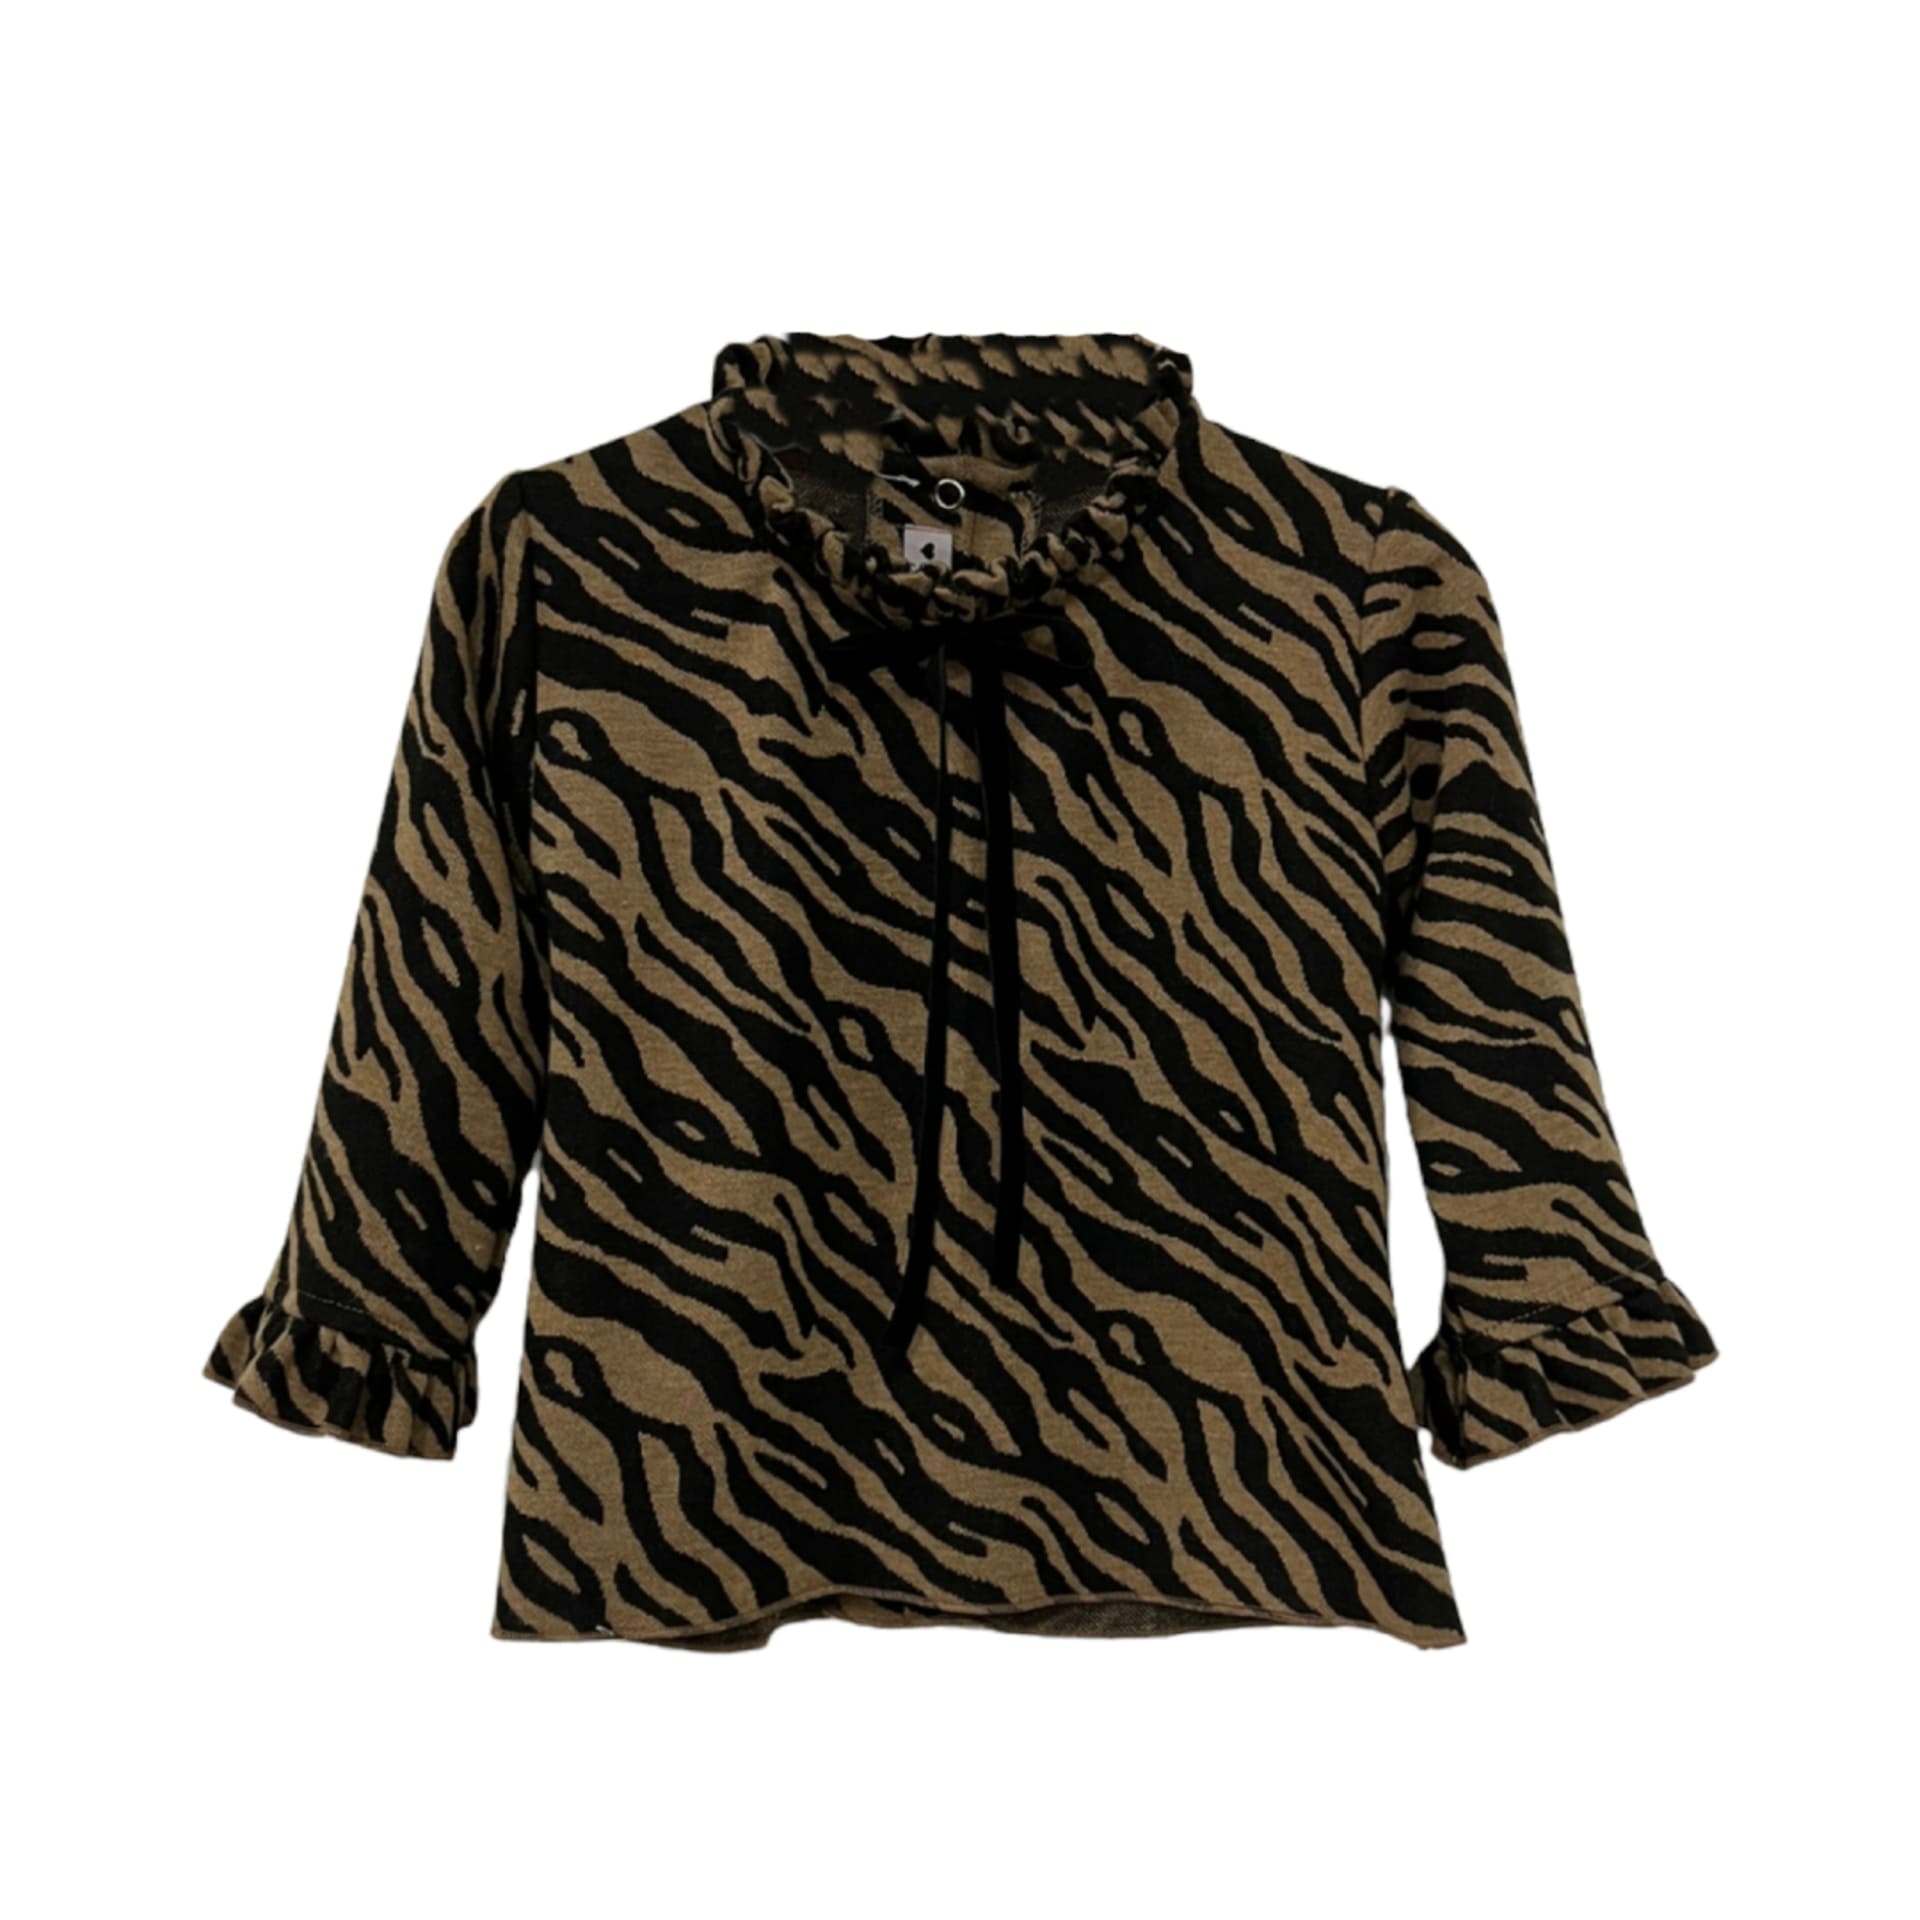 Tiger jersey jumper with bow